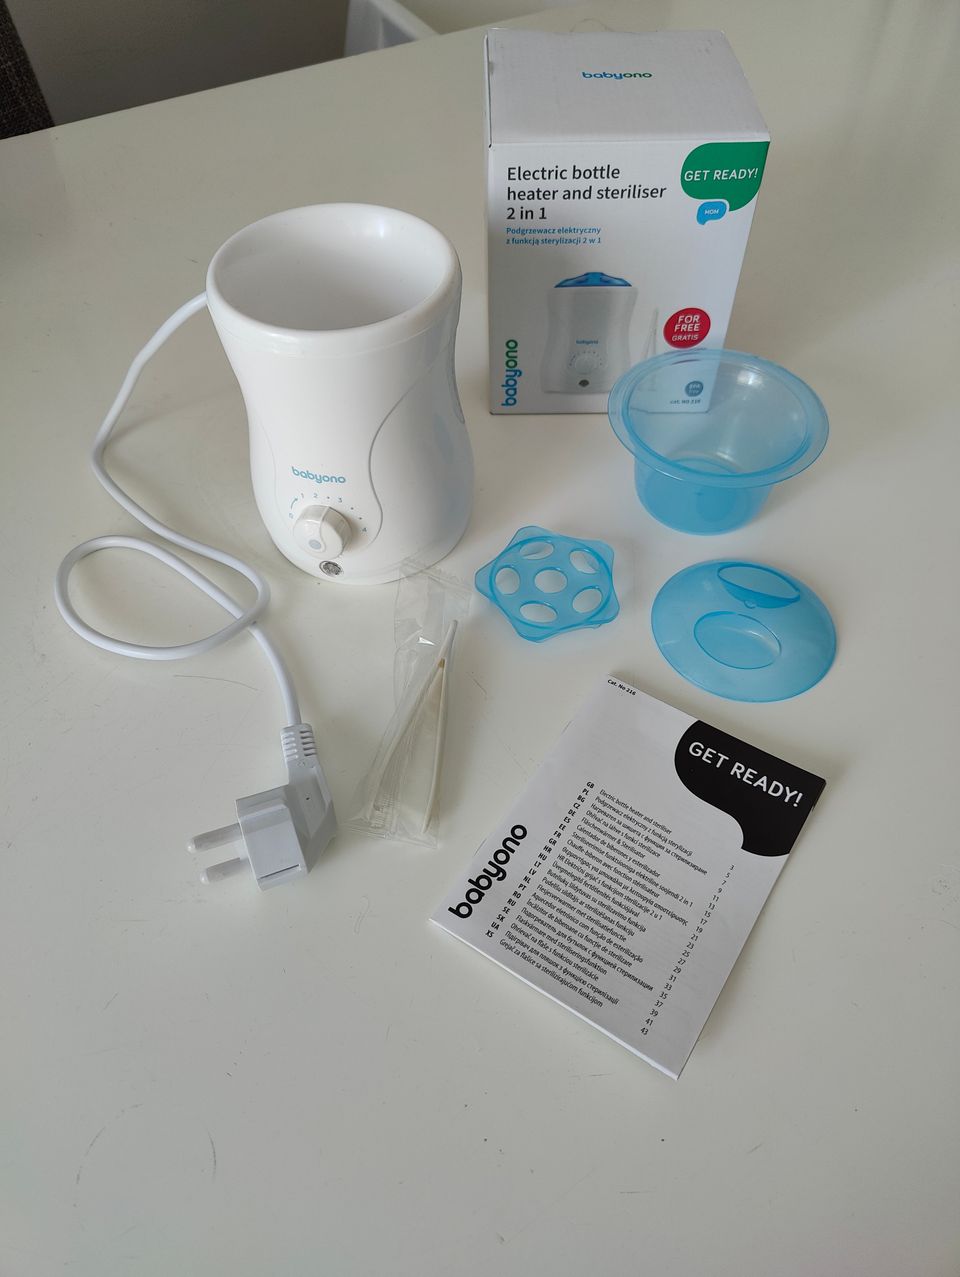 Babyono Electric bottle heater and steriliser 2 in 1